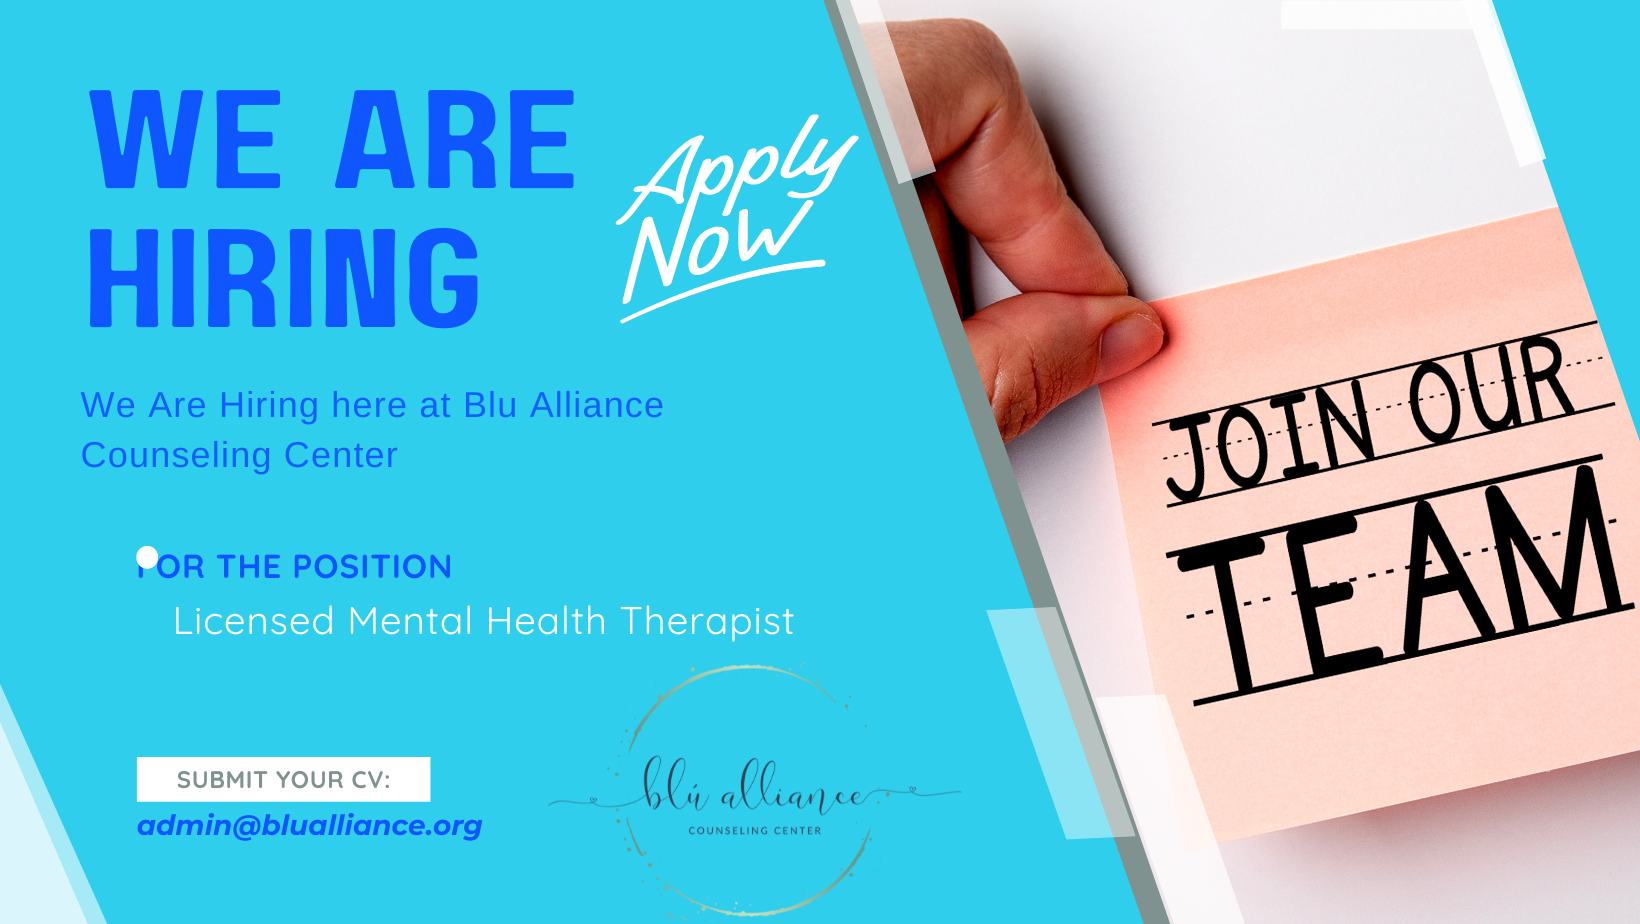 Join Our Team: Career Opportunities at Blu Alliance Counseling Center